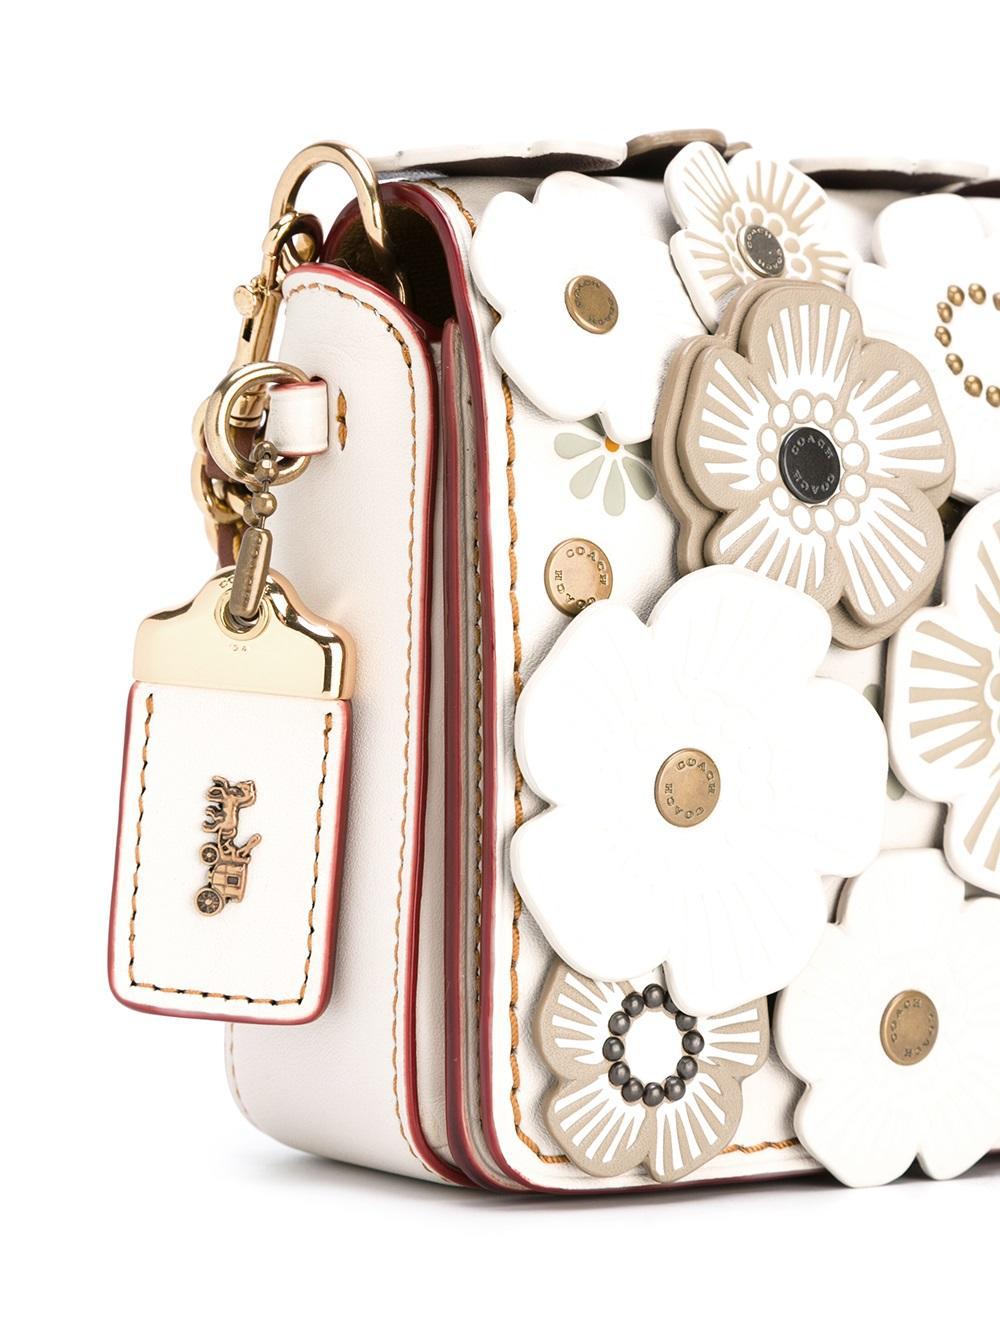 Lyst - Coach 'print Dinky' Floral Applique Crossbody Bag in White